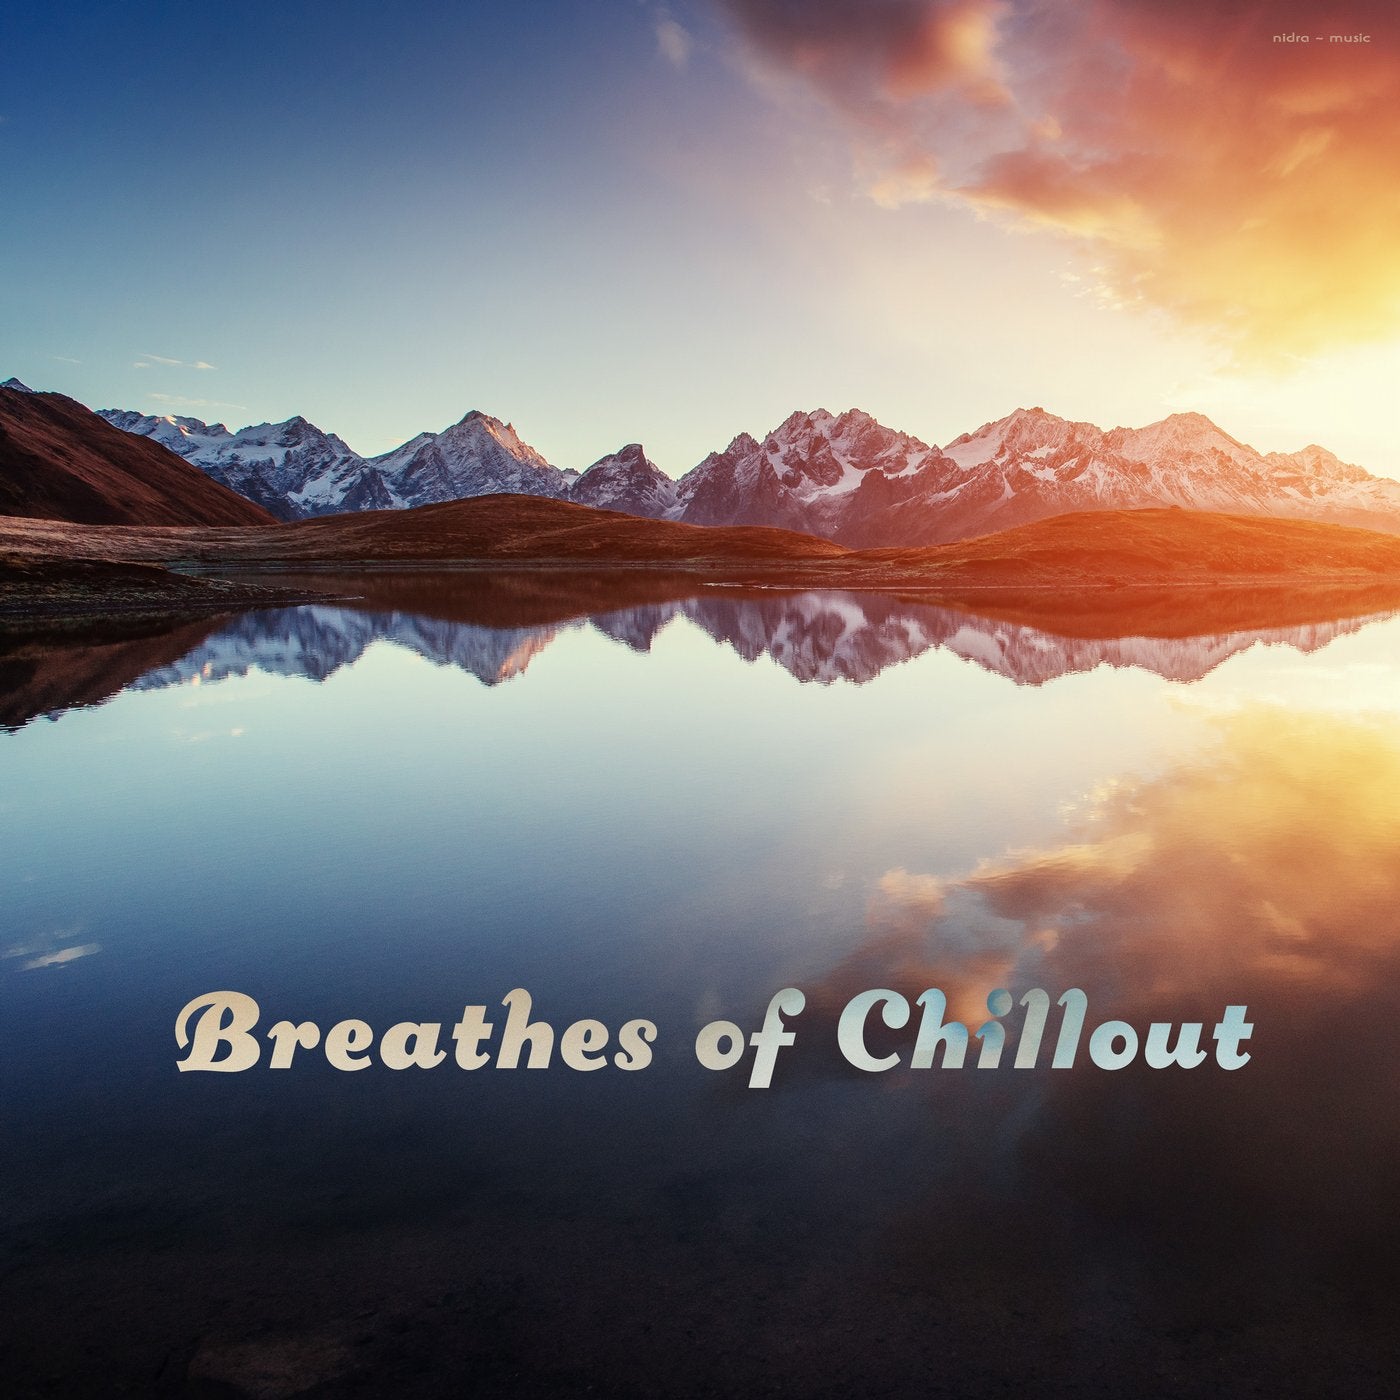 Breathes of Chillout